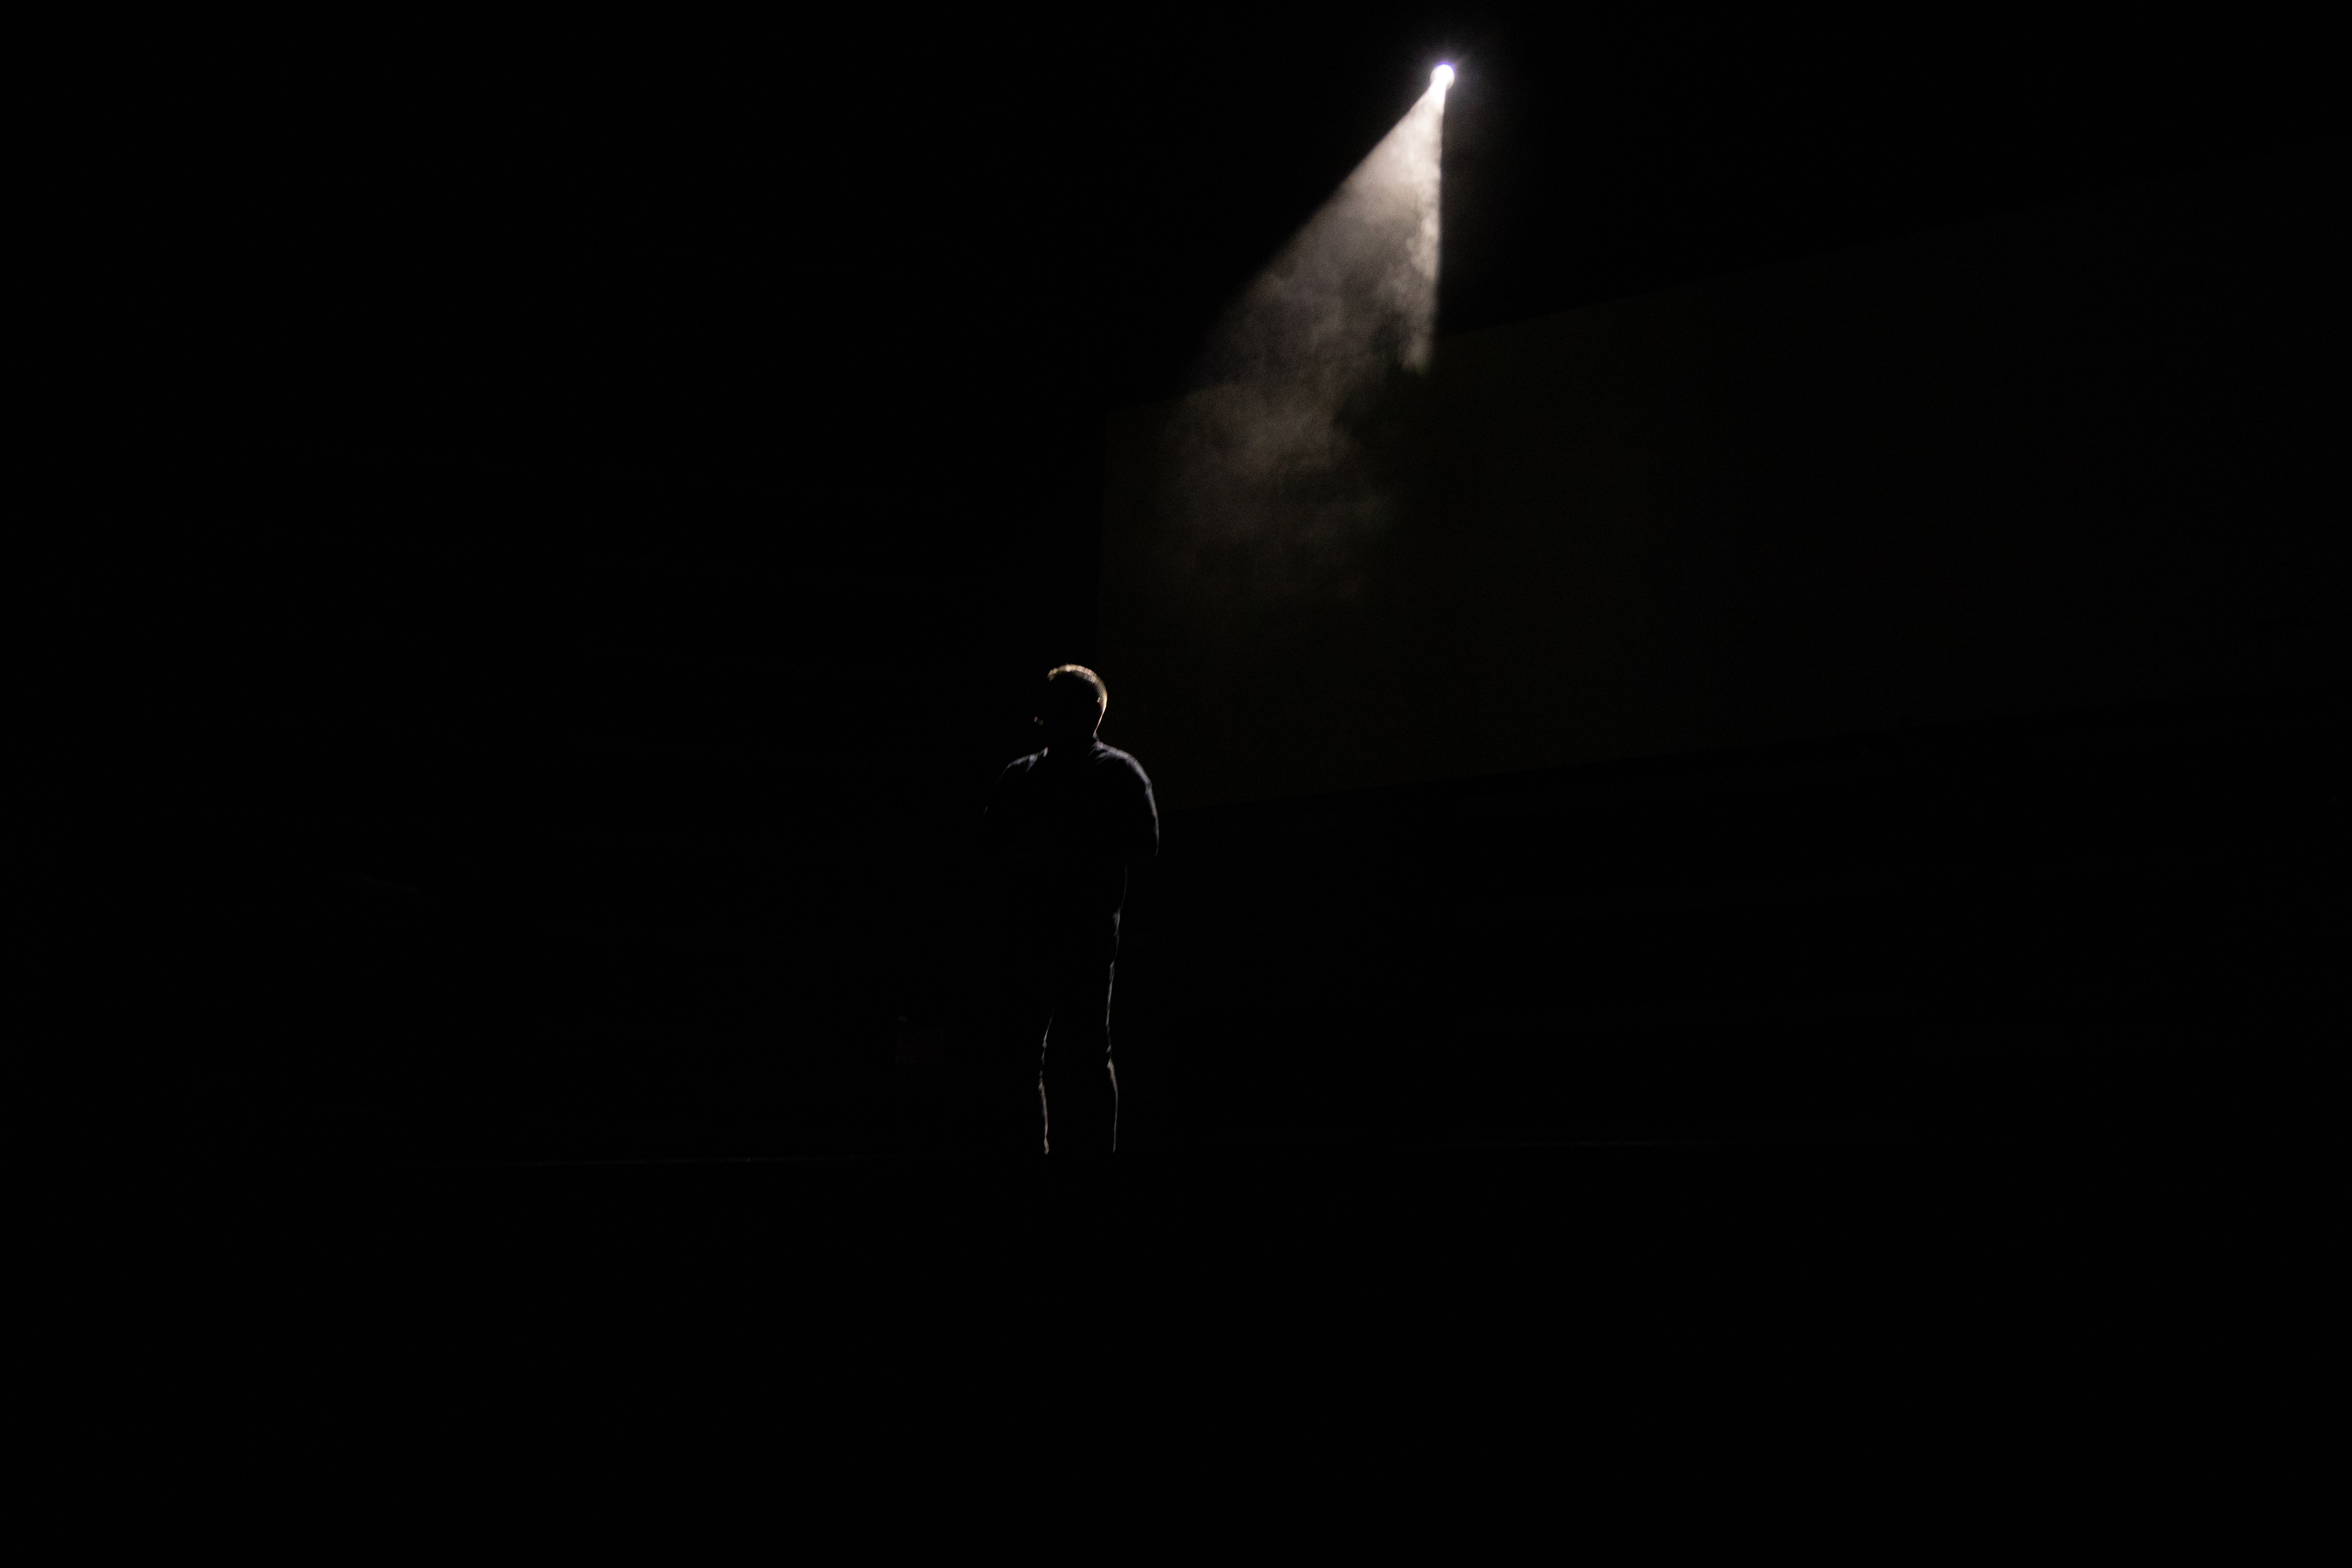 silhouette of person standing on stage